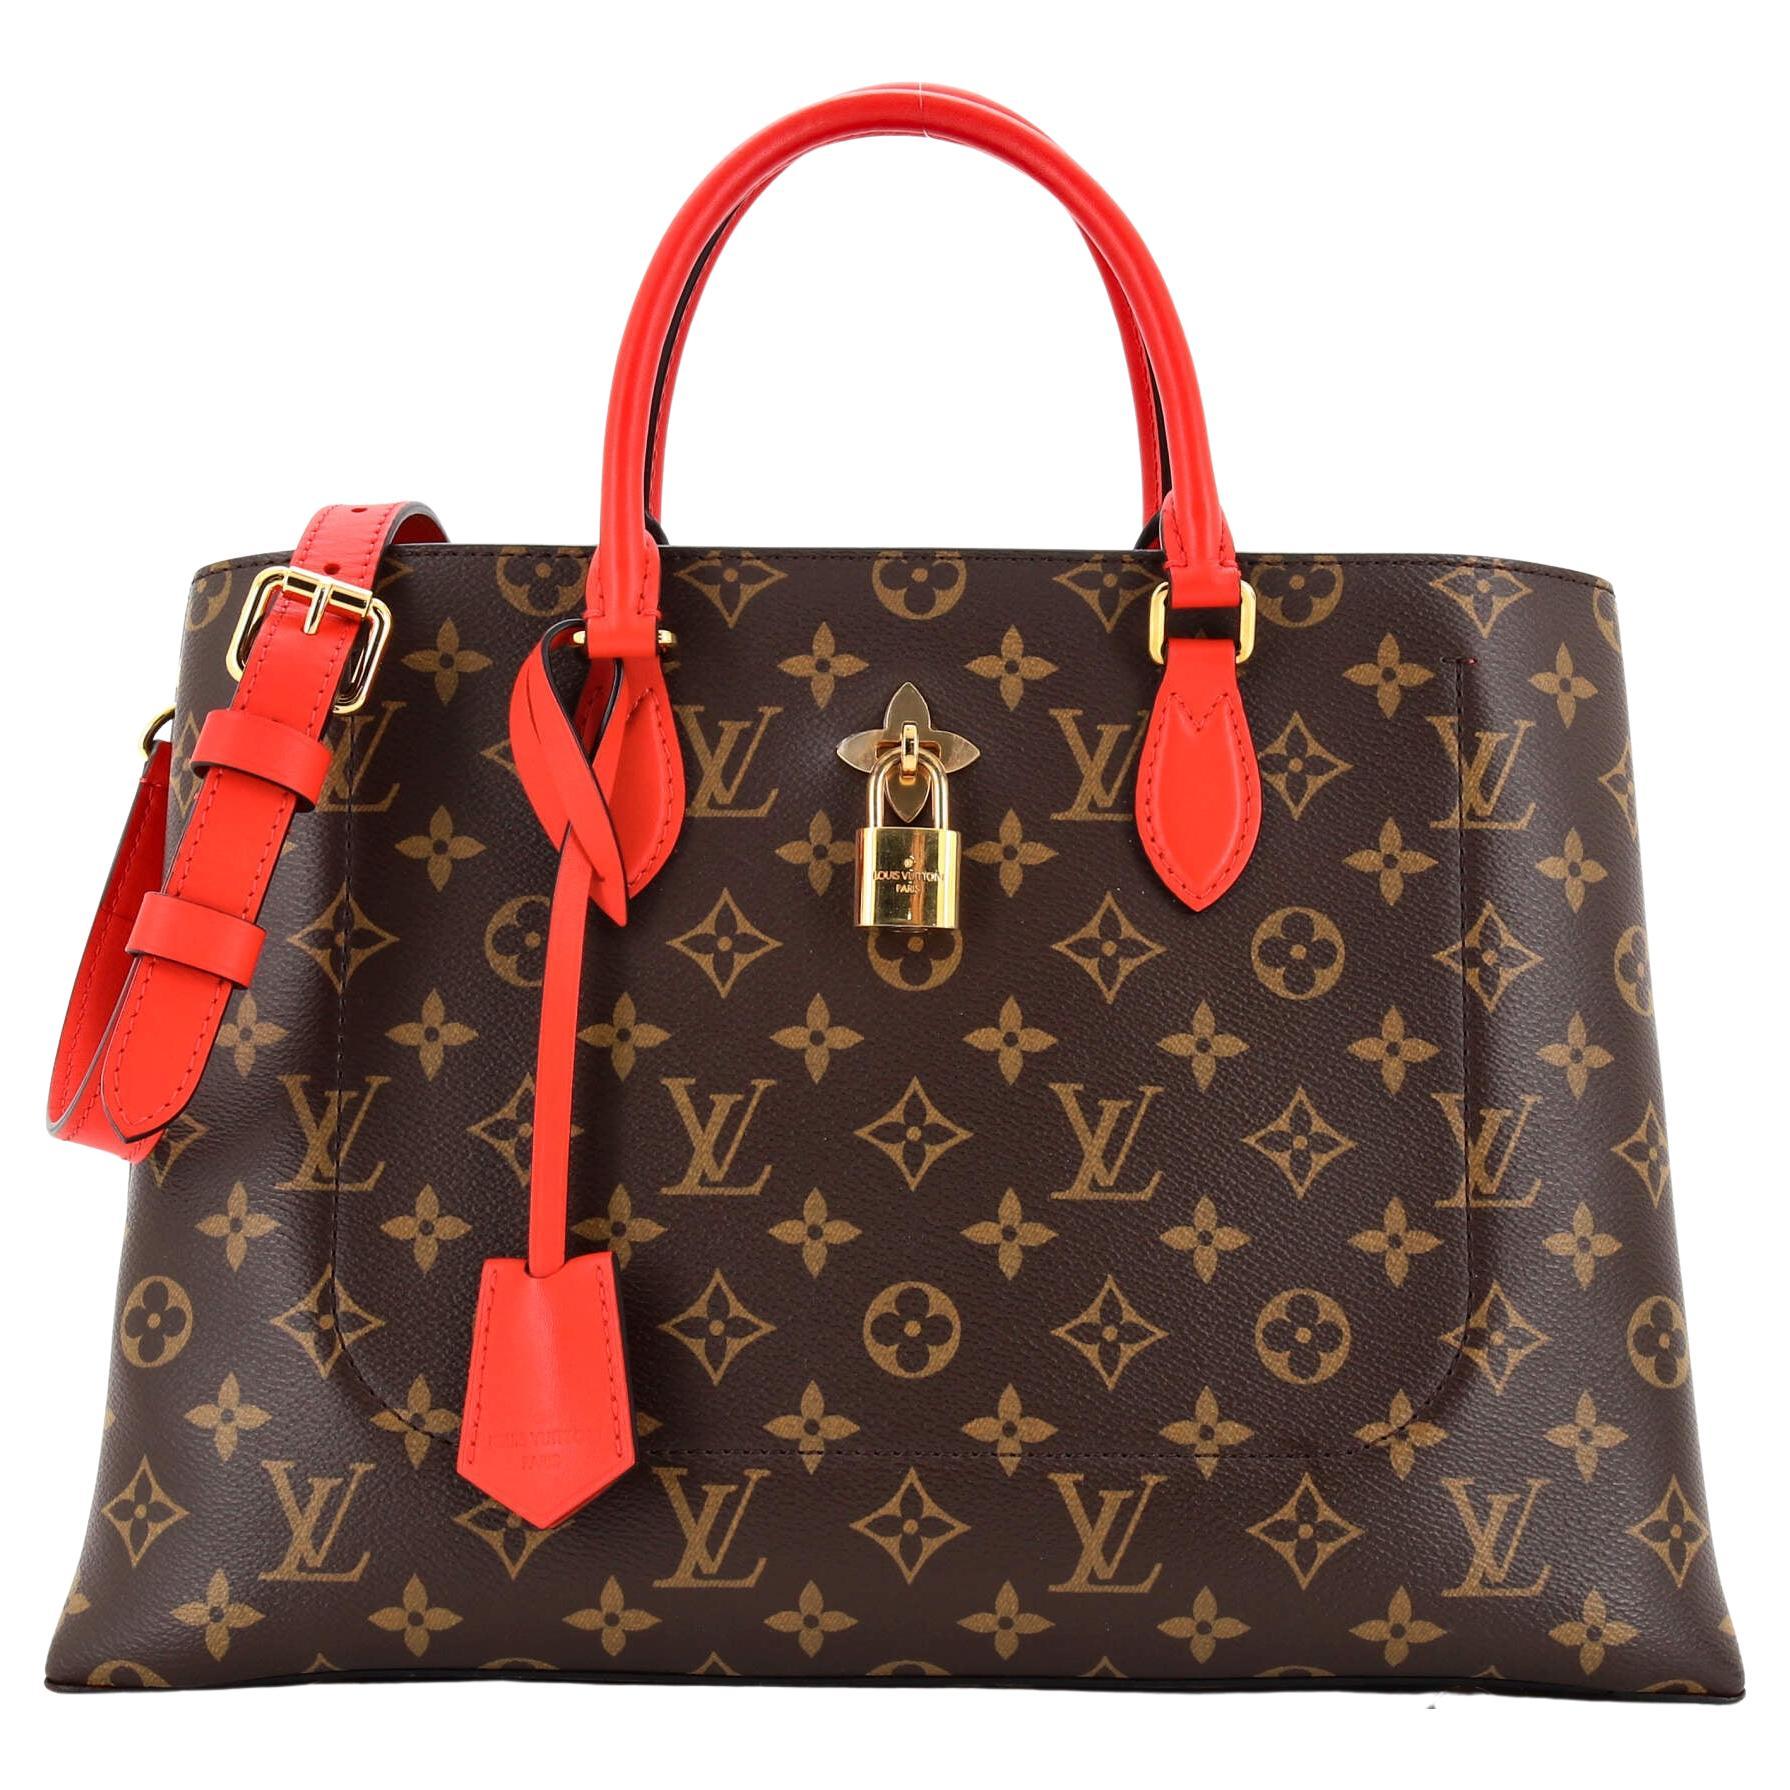 Sold at Auction: A handbag marked Louis Vuitton with chain/belted strap &  coin purse